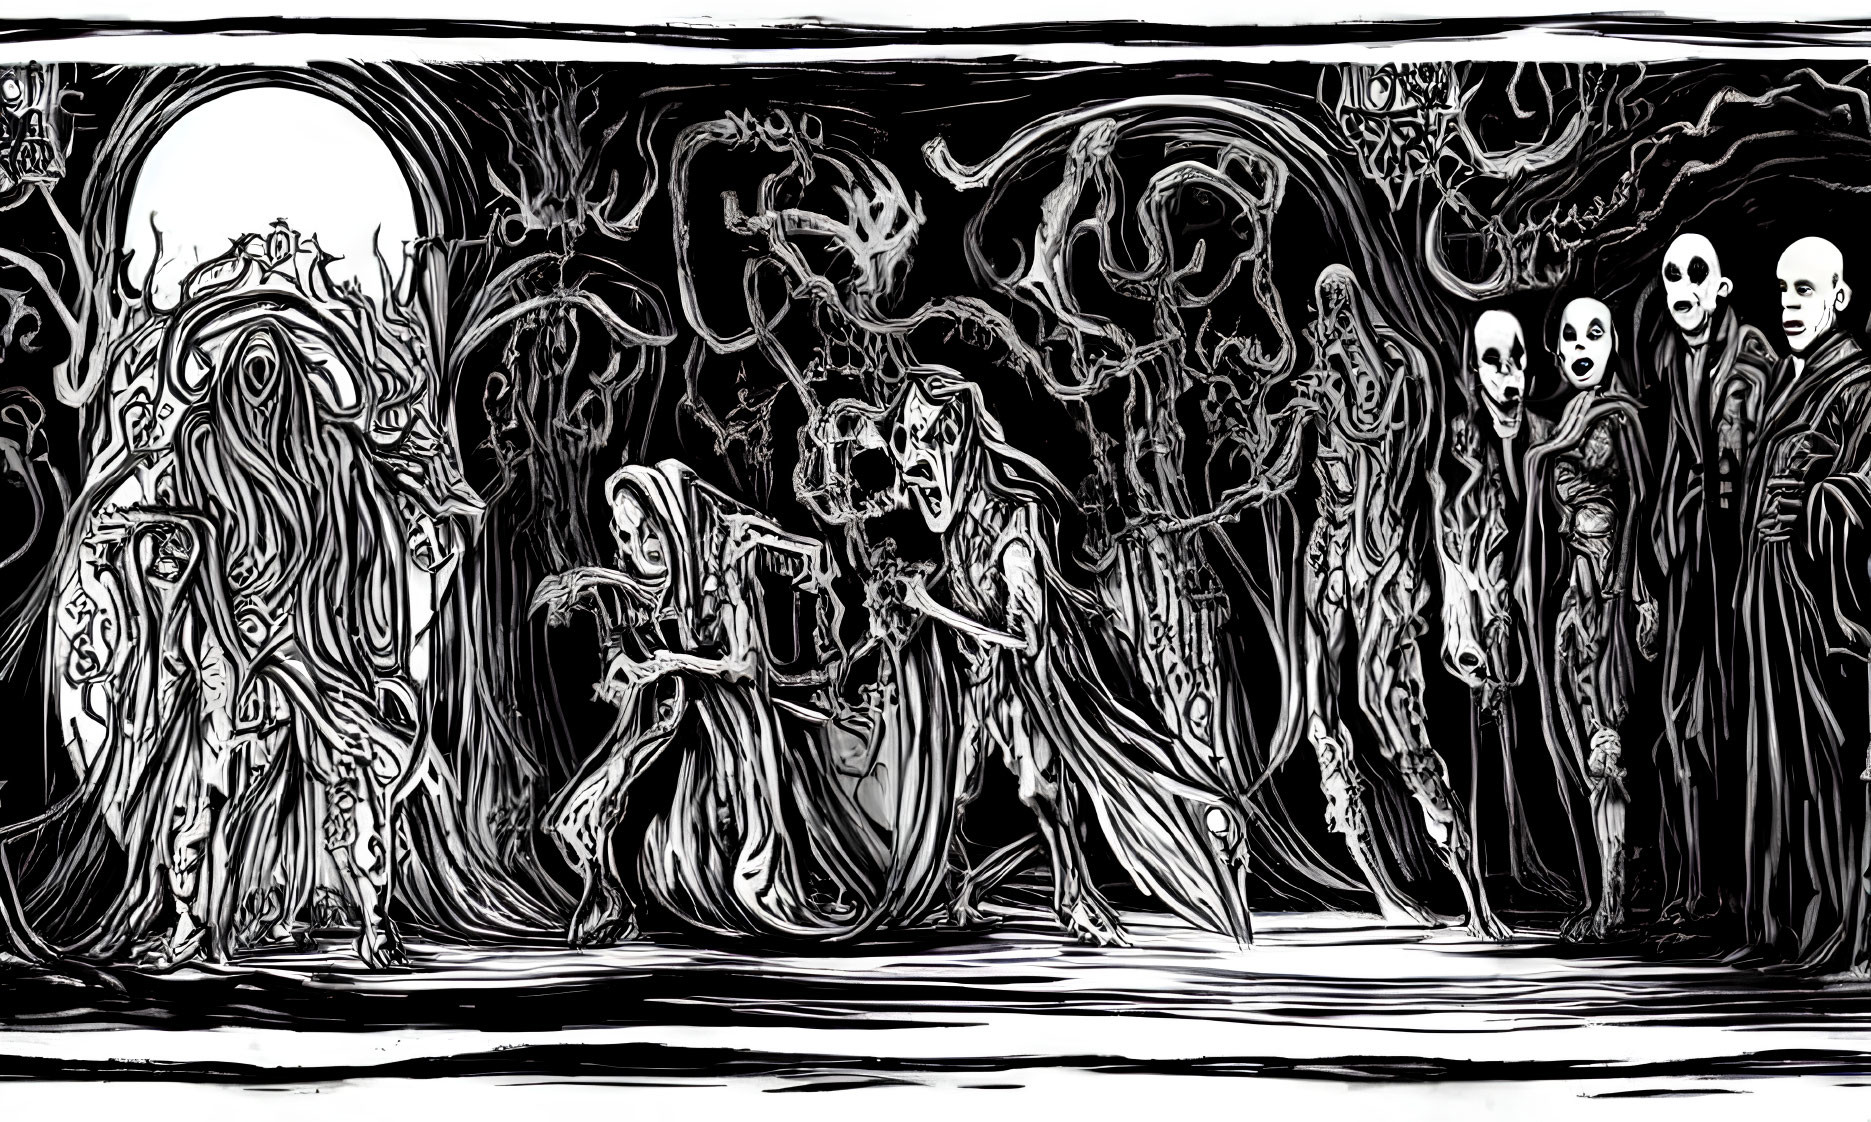 Monochromatic illustration of ghostly figures in dark forest